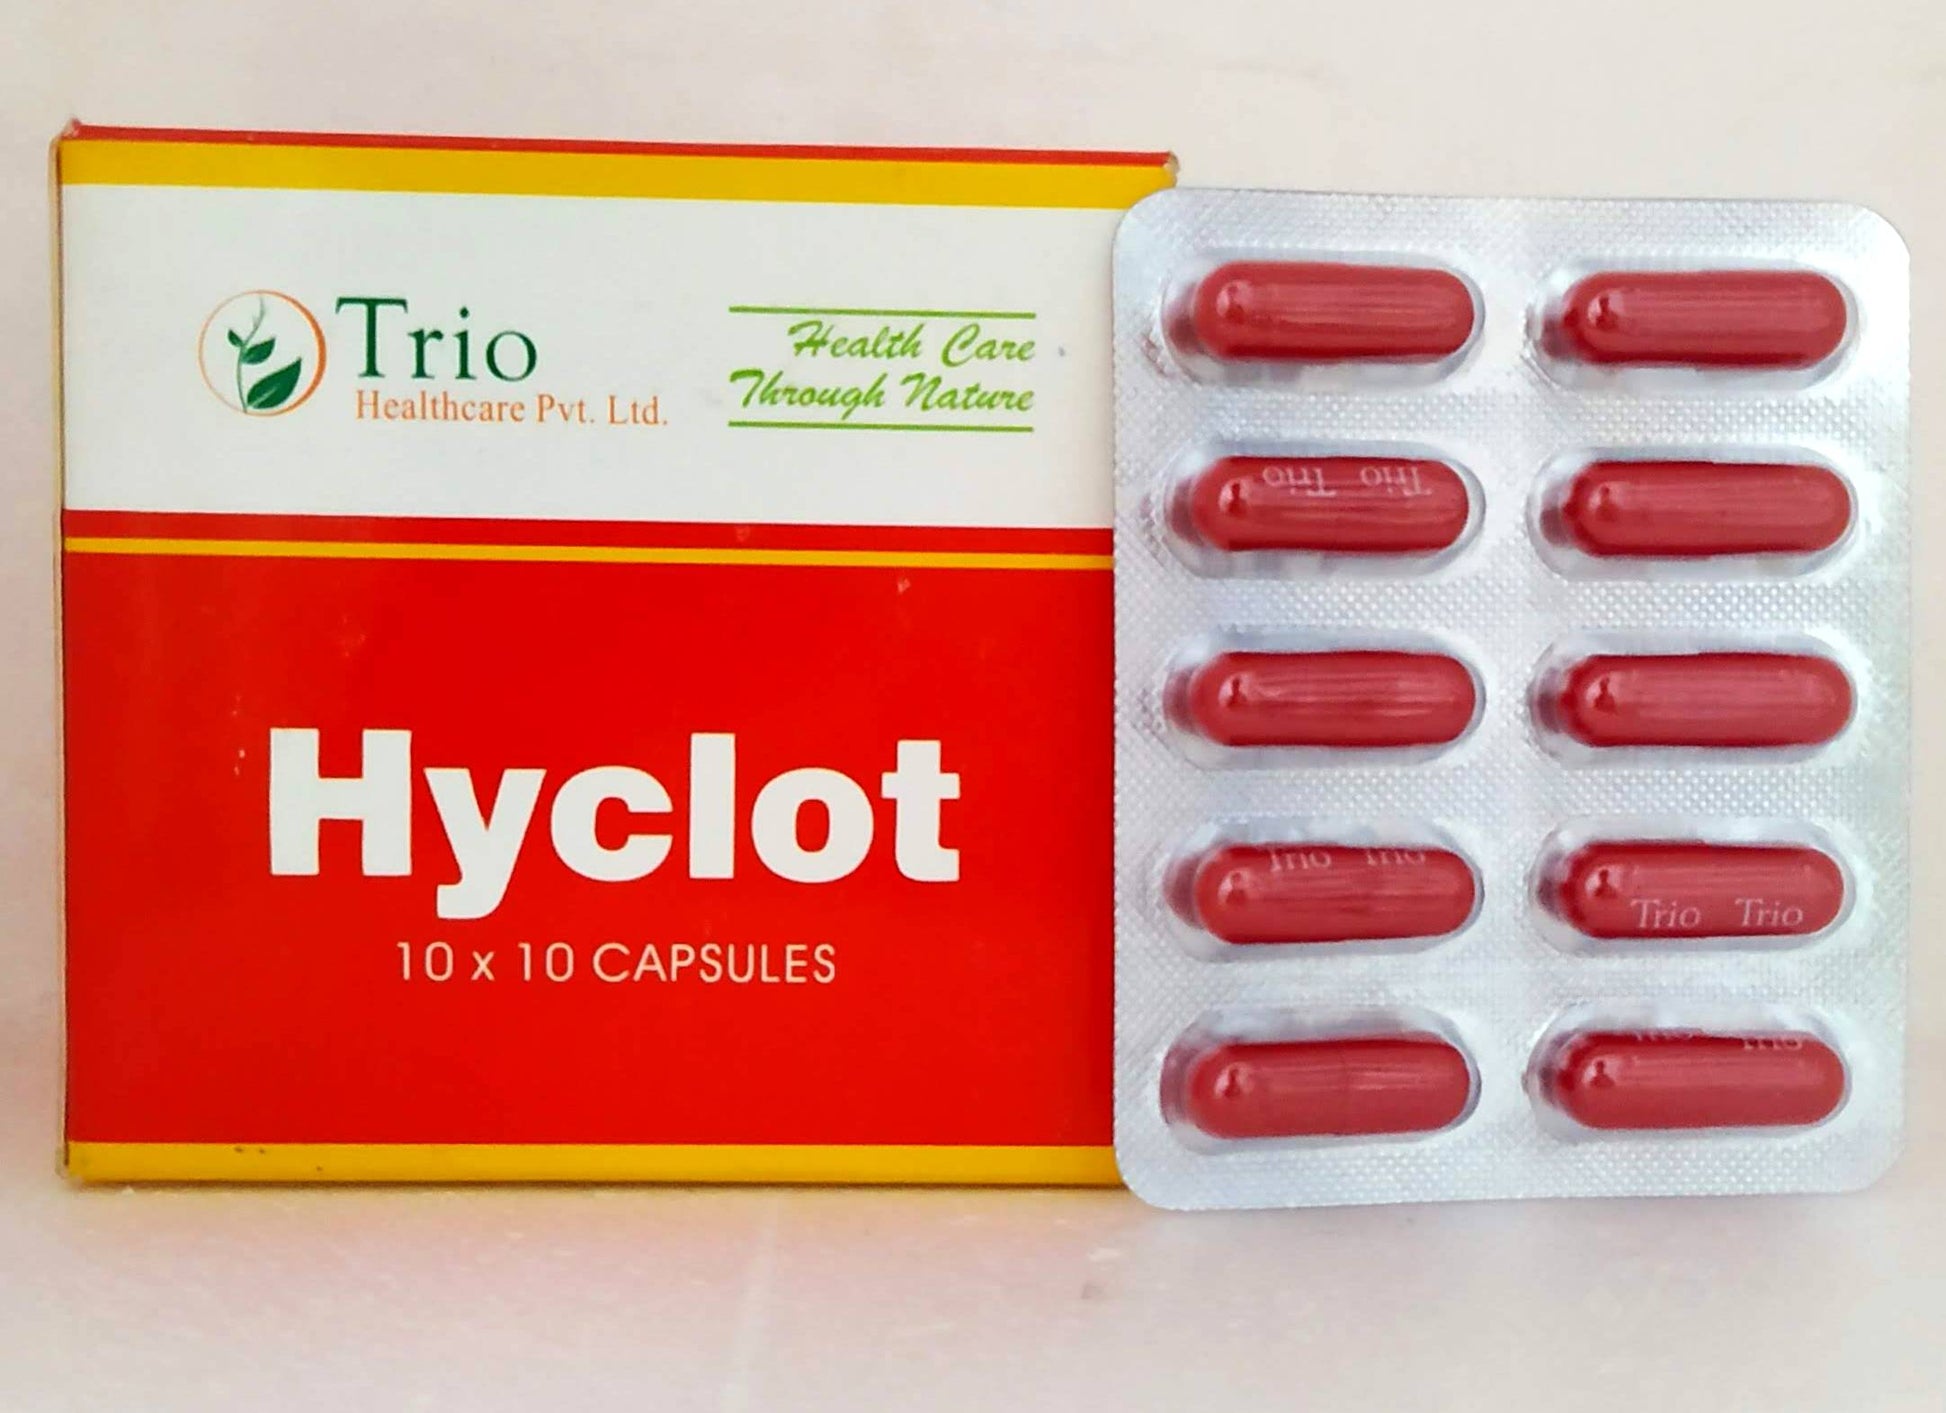 Shop Hyclot Capsules - 10Capsules at price 55.00 from Trio Online - Ayush Care